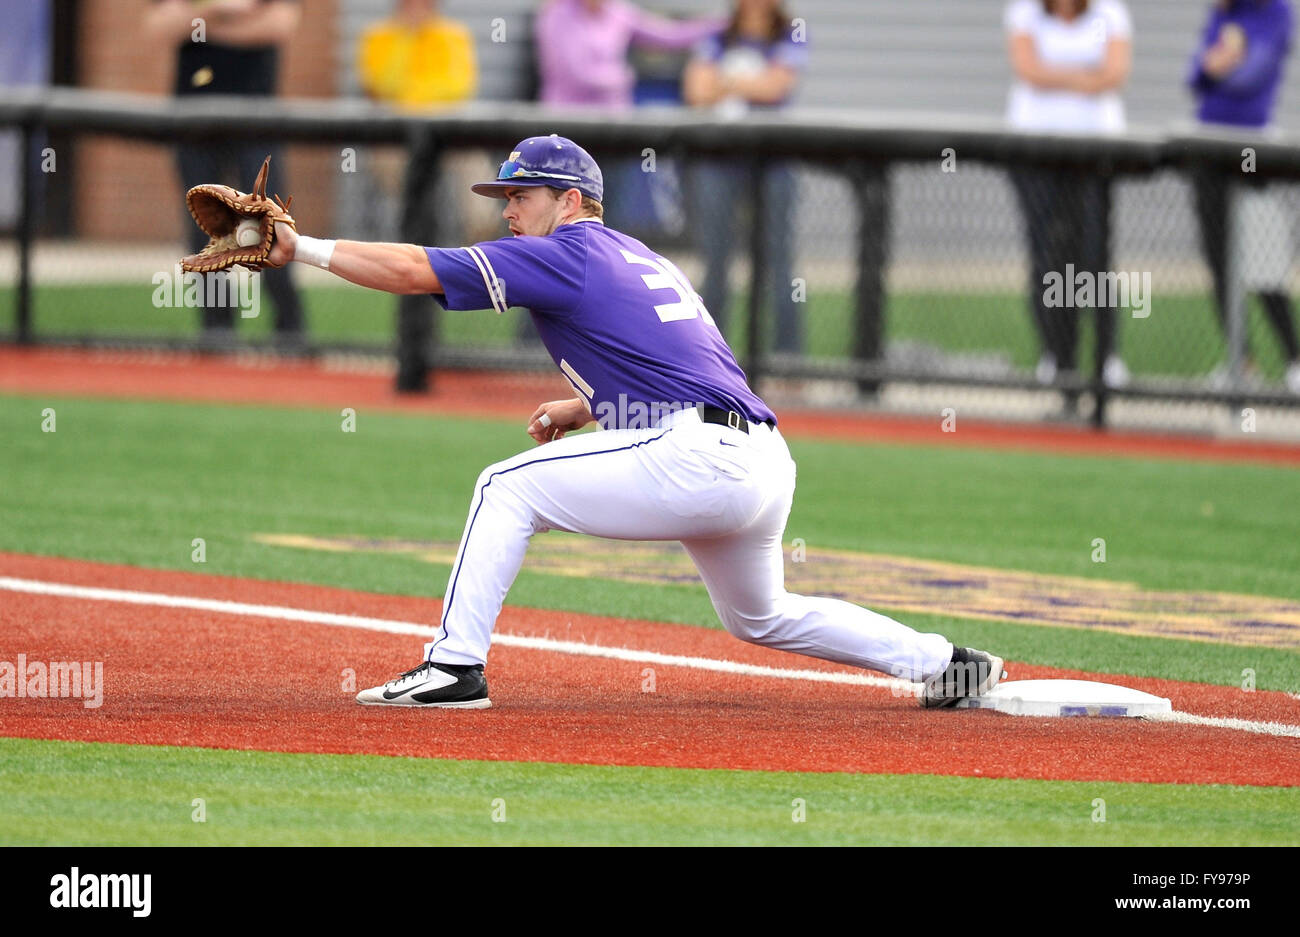 UW firstbaseman John Naff (31) makes the play at 1st base for an out during  this non-conference NCAA baseball game between St Marys and the University  of Washington. The University of Washington